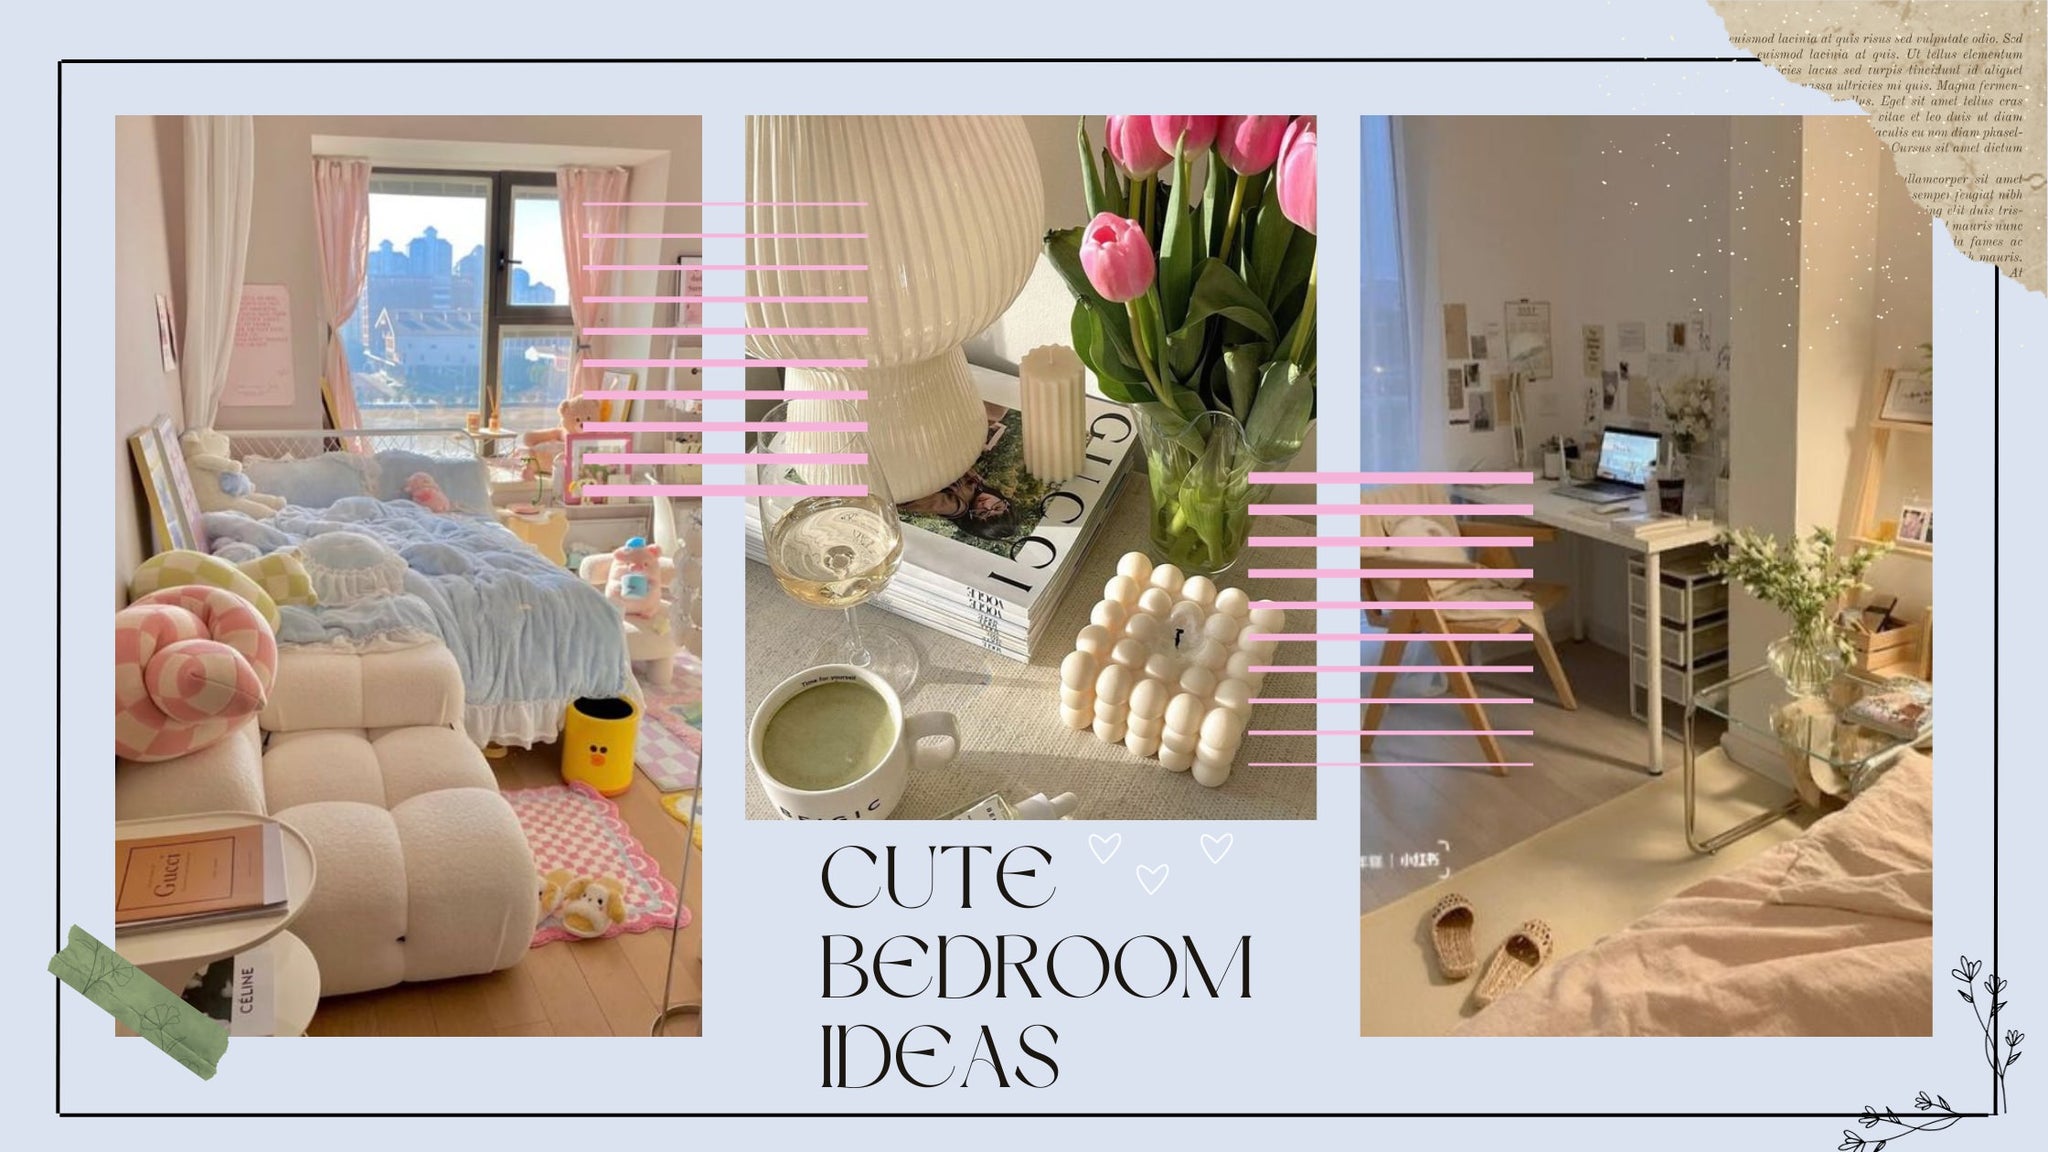 The Best Aesthetic Bedroom Decor & Accessories From